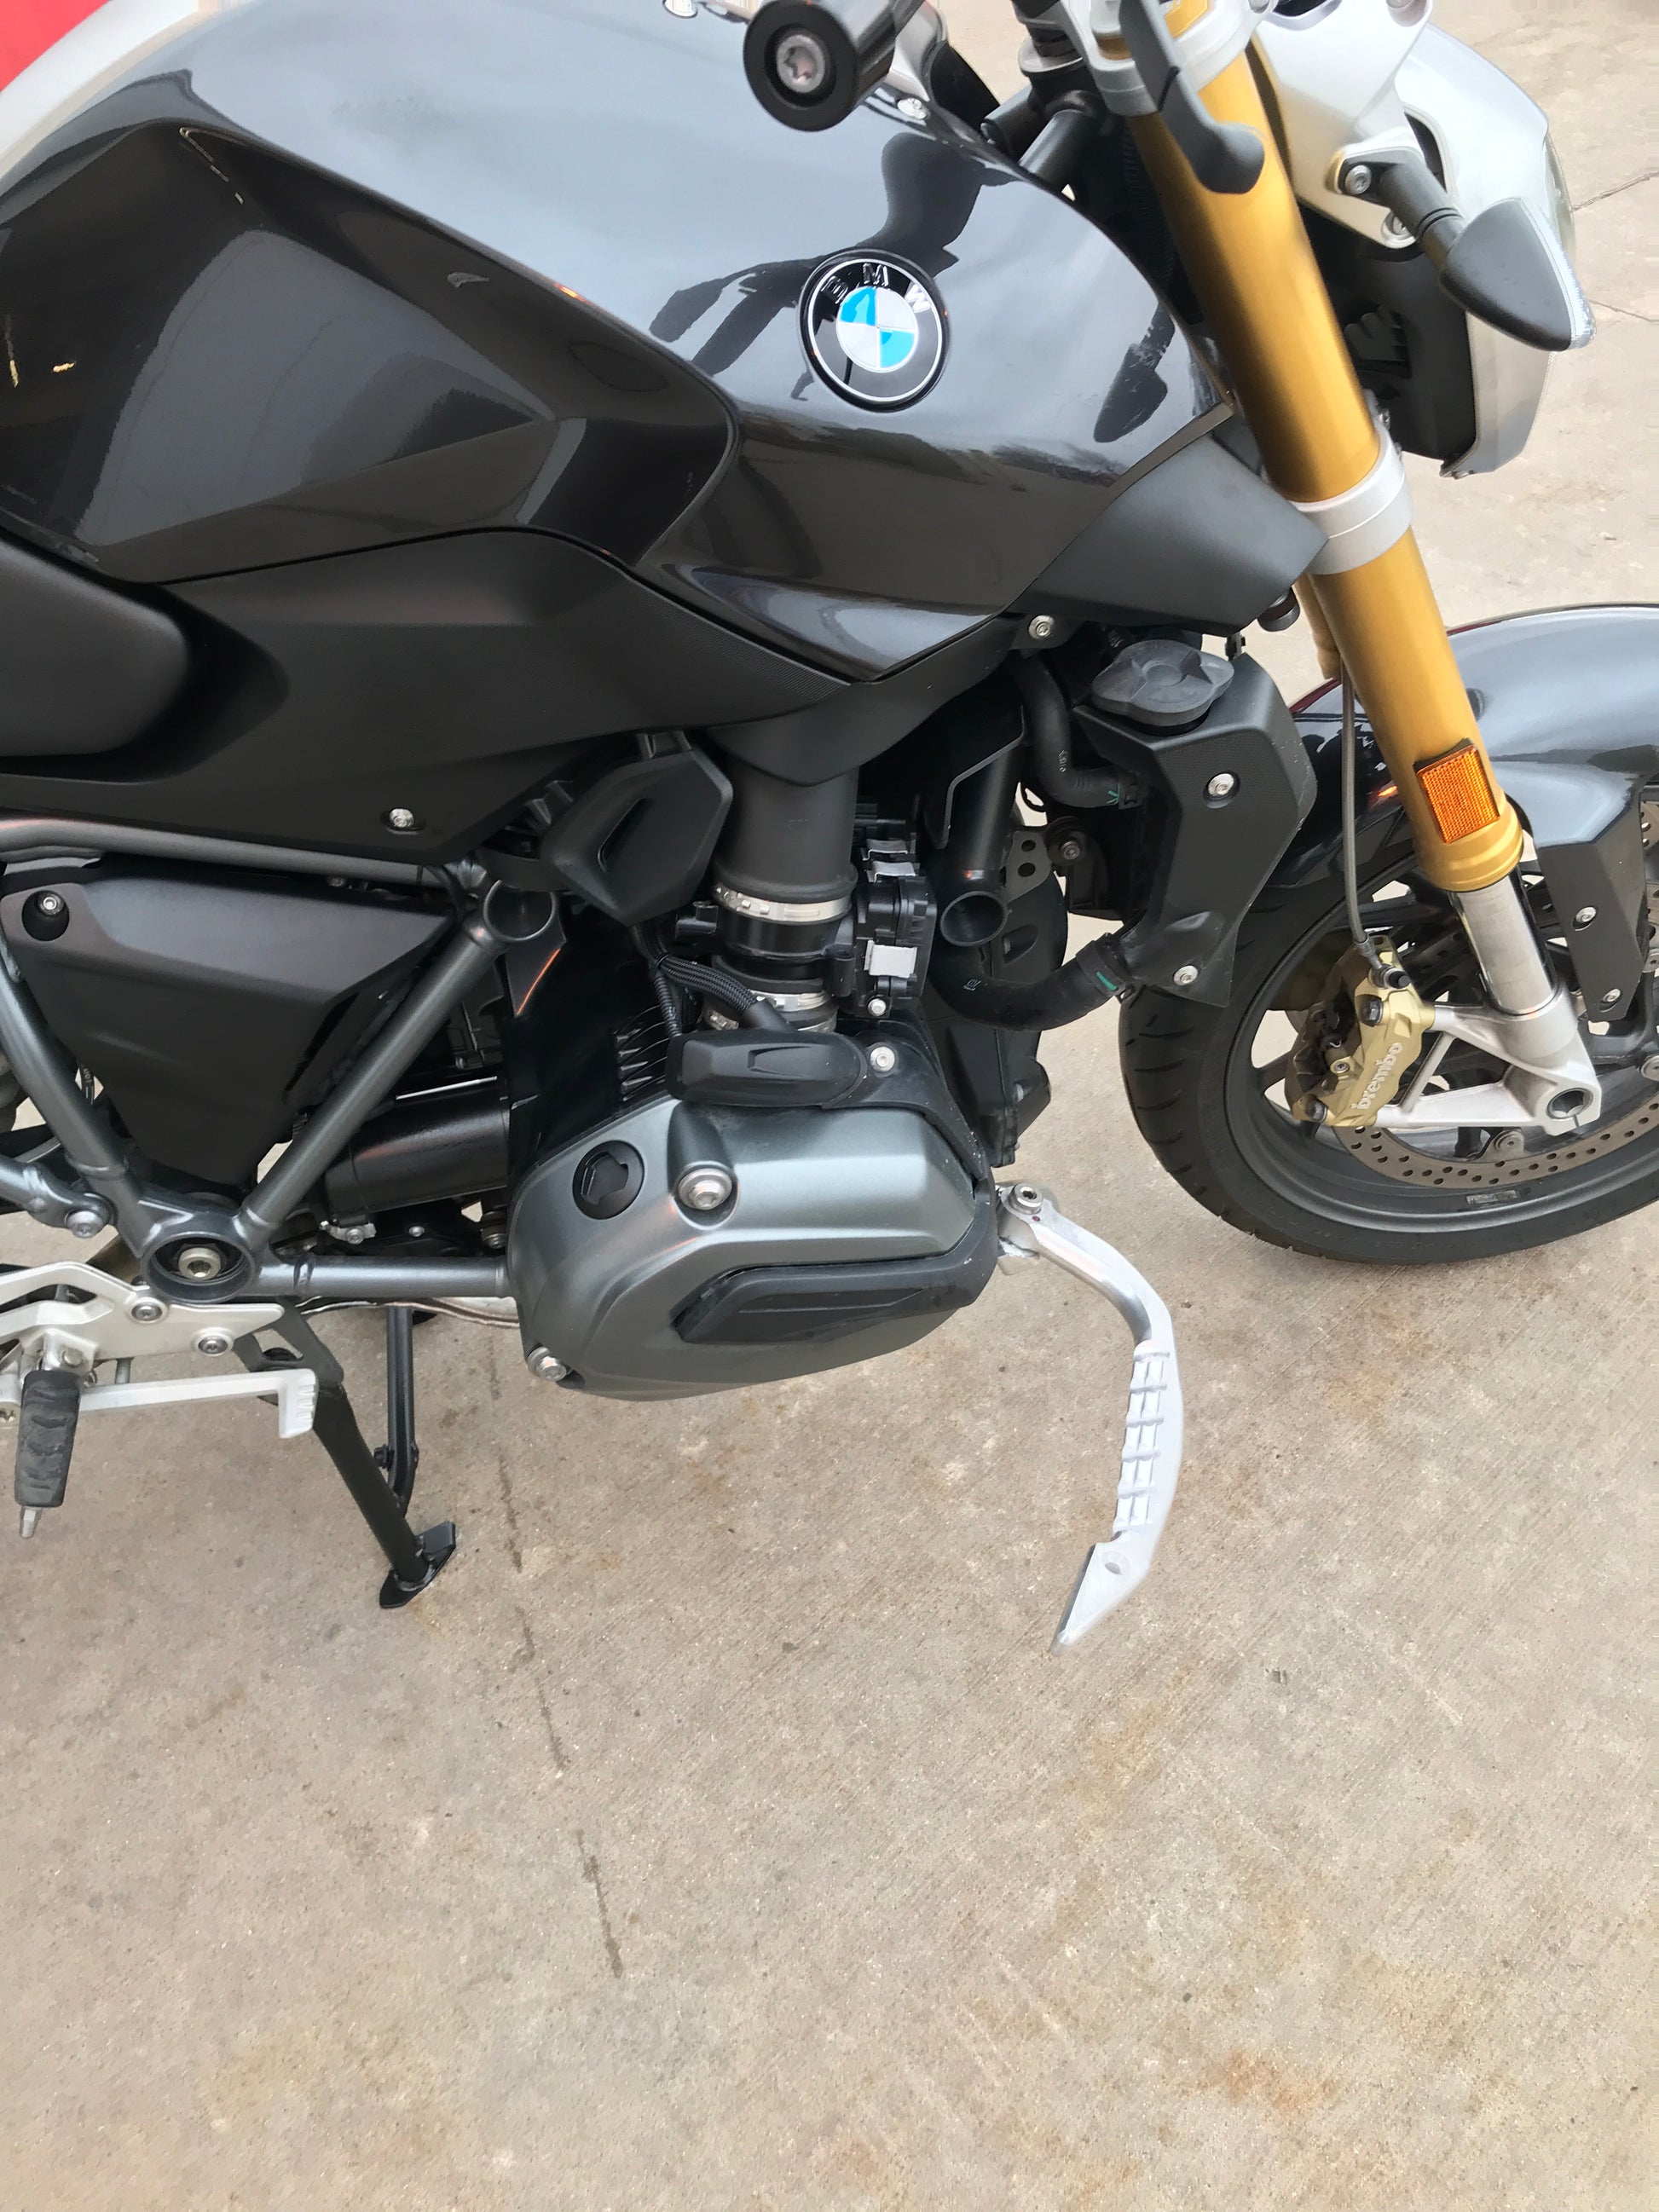 BMW R1200 high quality highway peg foot rests.